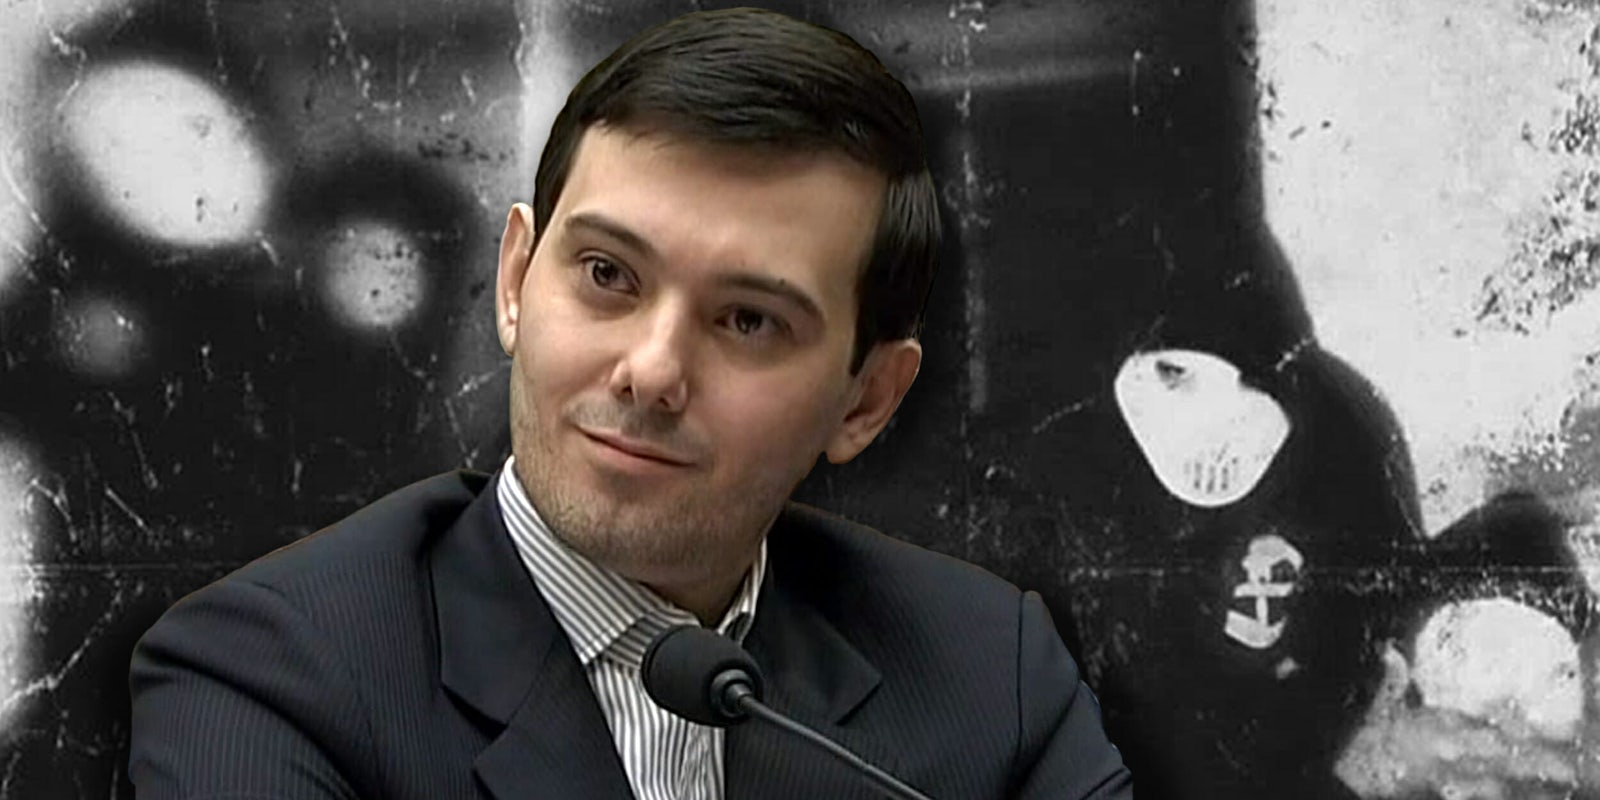 Martin Shkreli in front of 'Once Upon A Time In Shaolin' cover